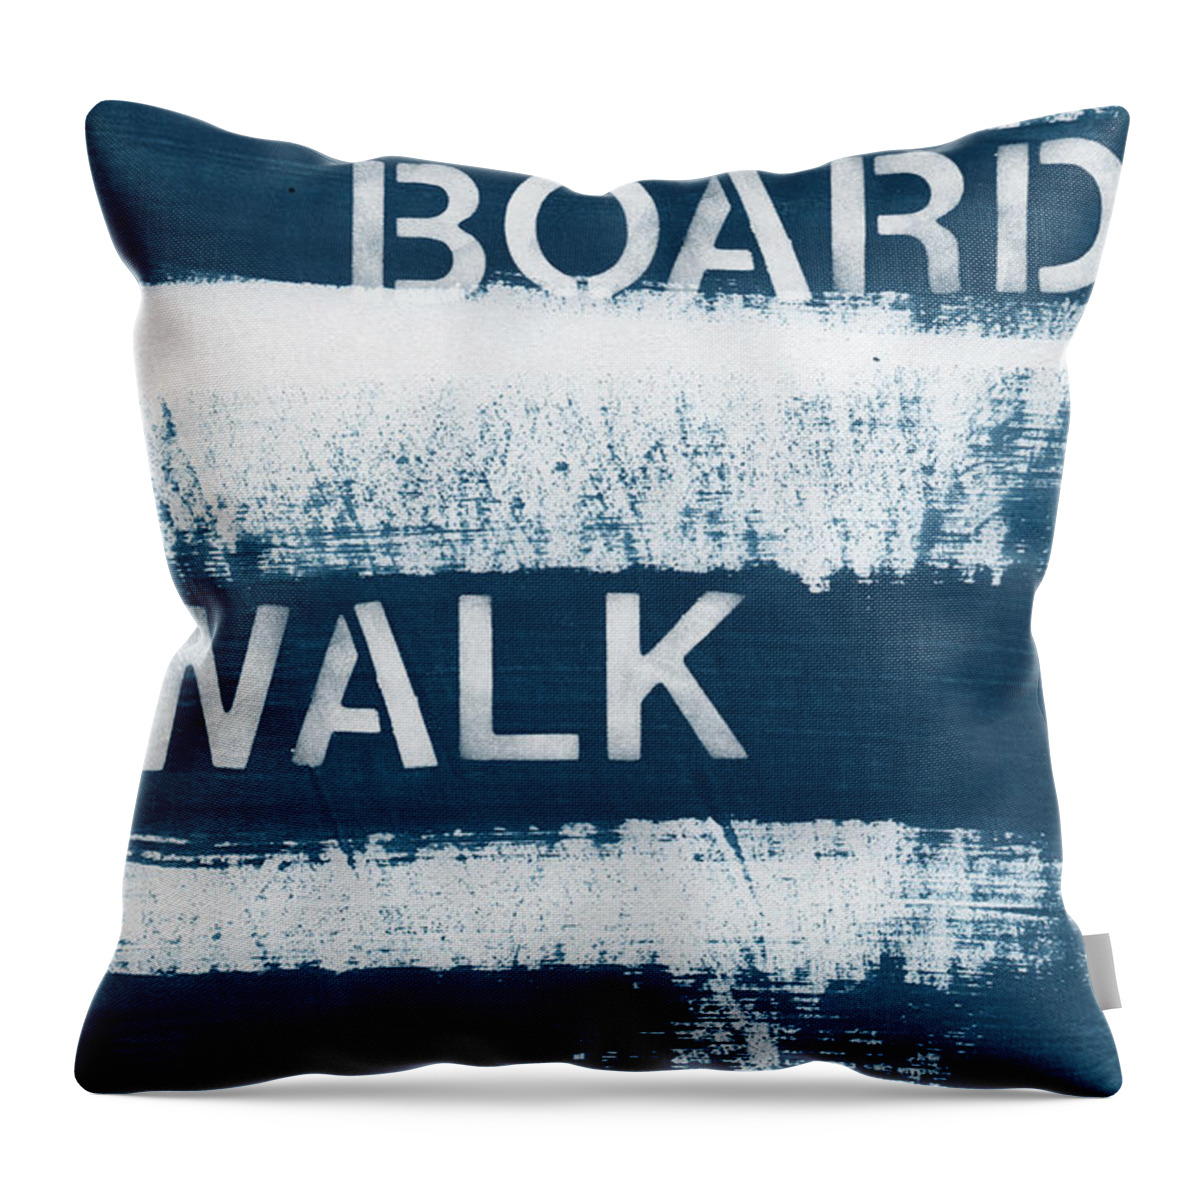 Beach Throw Pillow featuring the painting Under The Boardwalk by Linda Woods